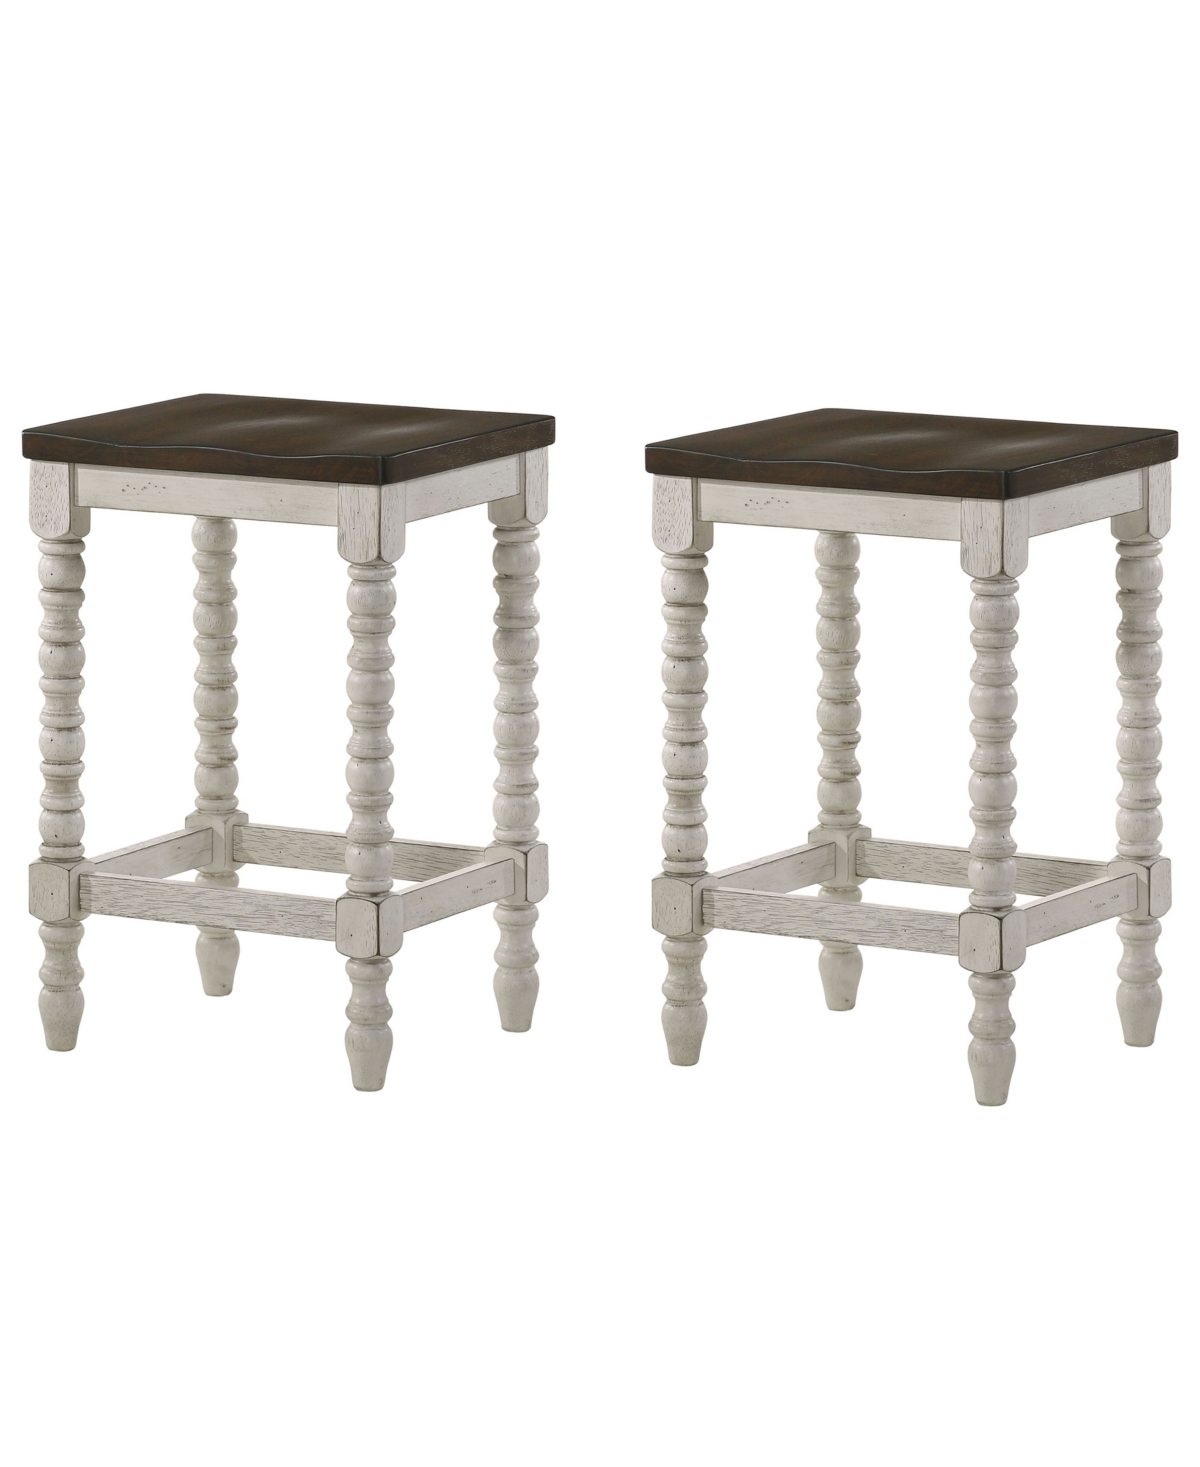 Furniture Of America Hollia Farmhouse 2 Piece Solid Wood Counter Height Stools Set In Dark Walnut And Antique-like White